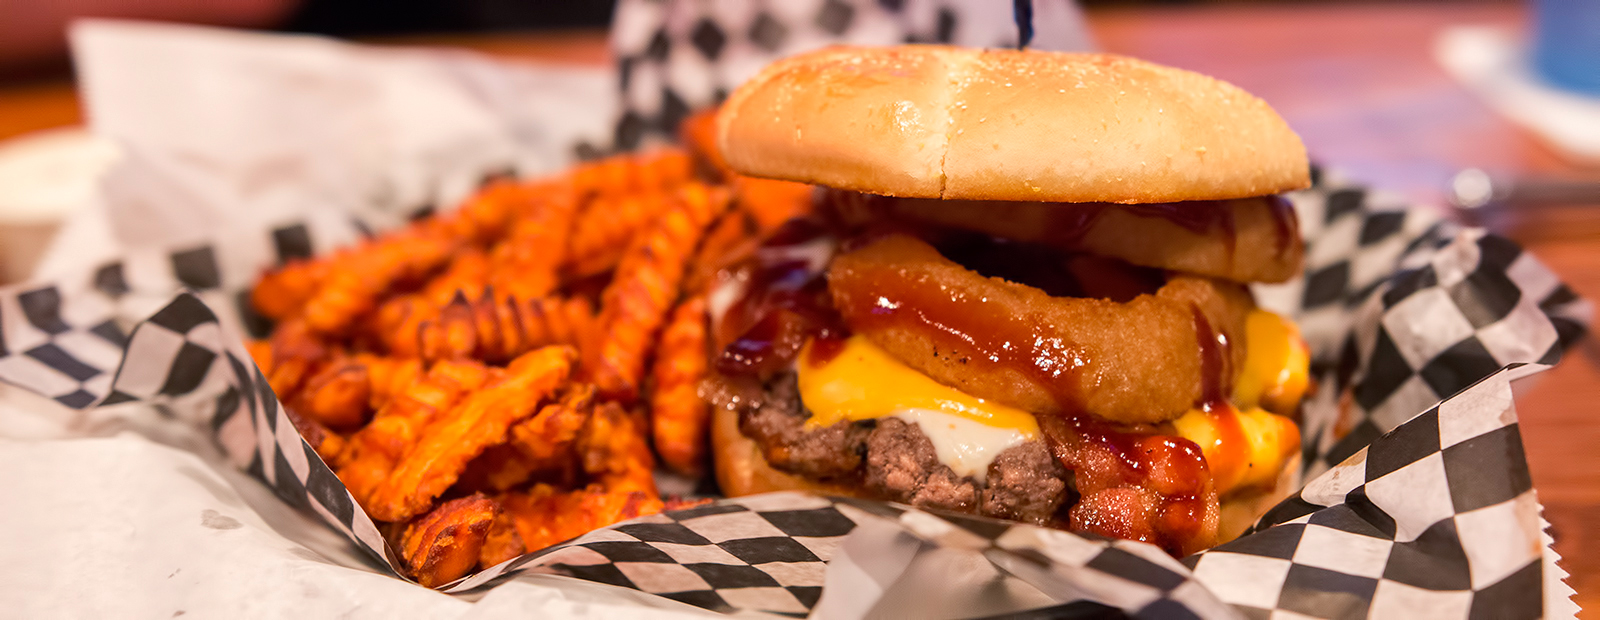 CJ's Rodeo Burger is a great choice when looking for a good meal.